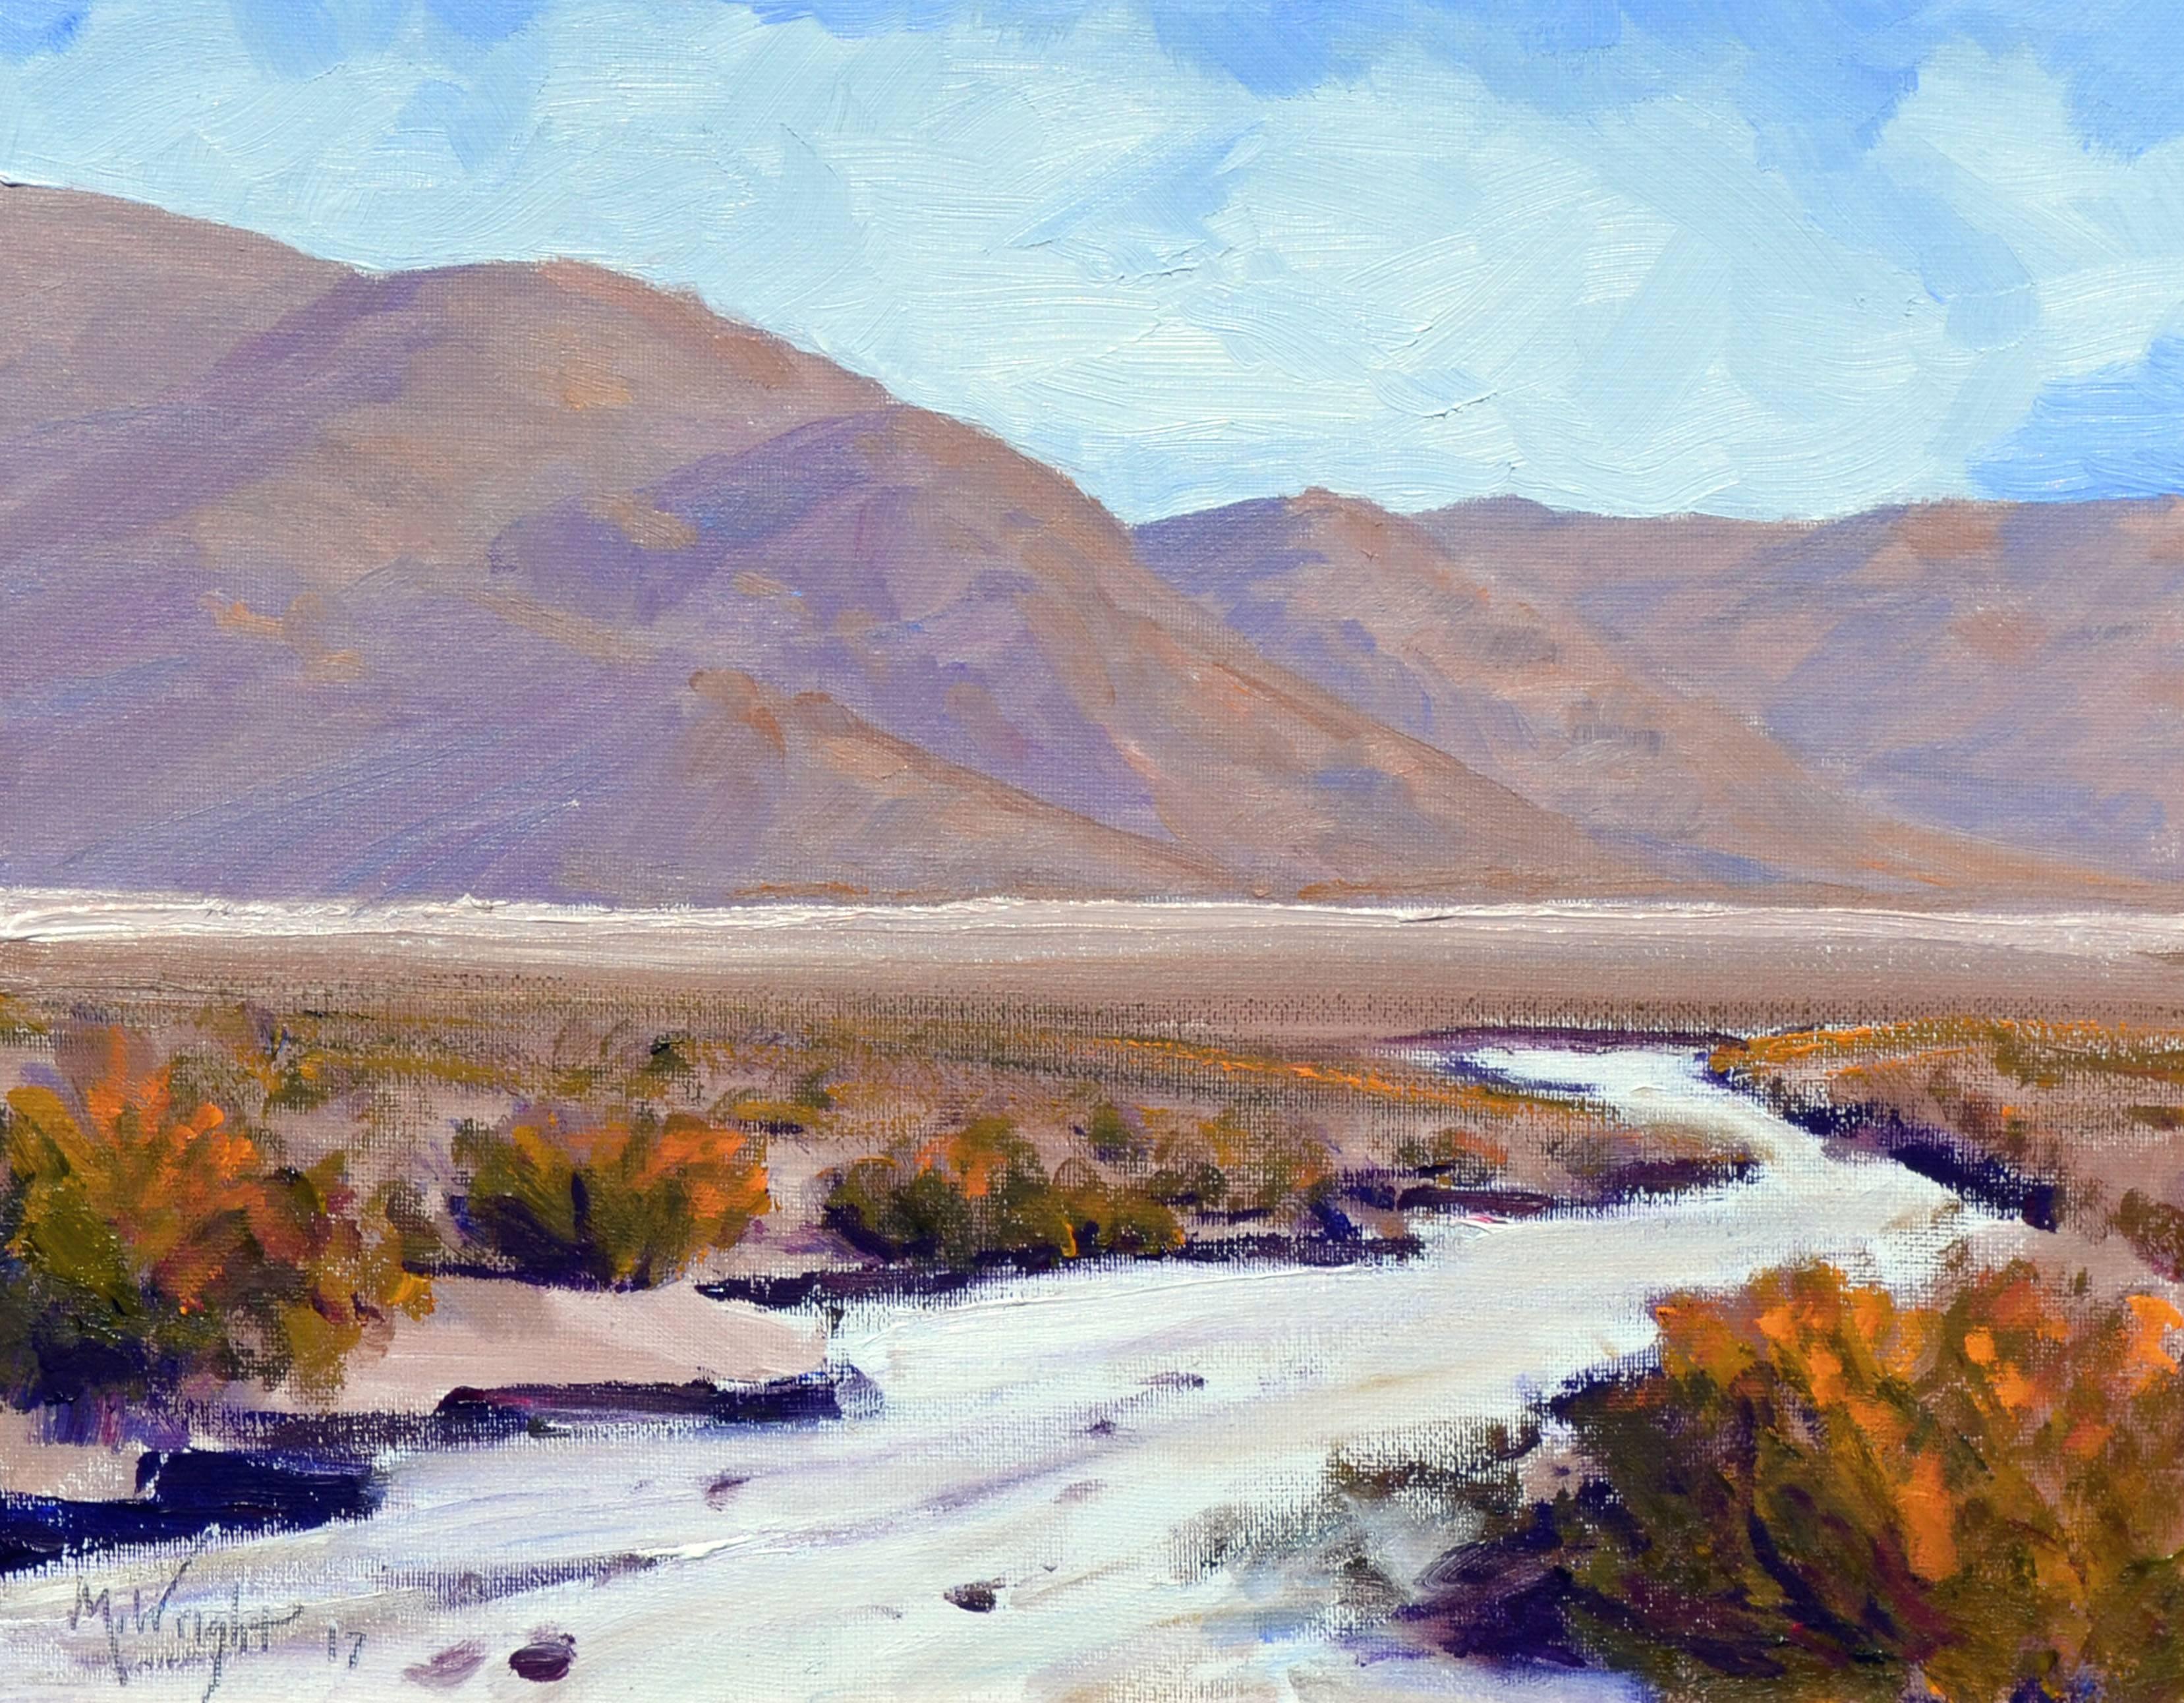 Desert Flats, Death Valley Landscape - Painting by Michael Wright